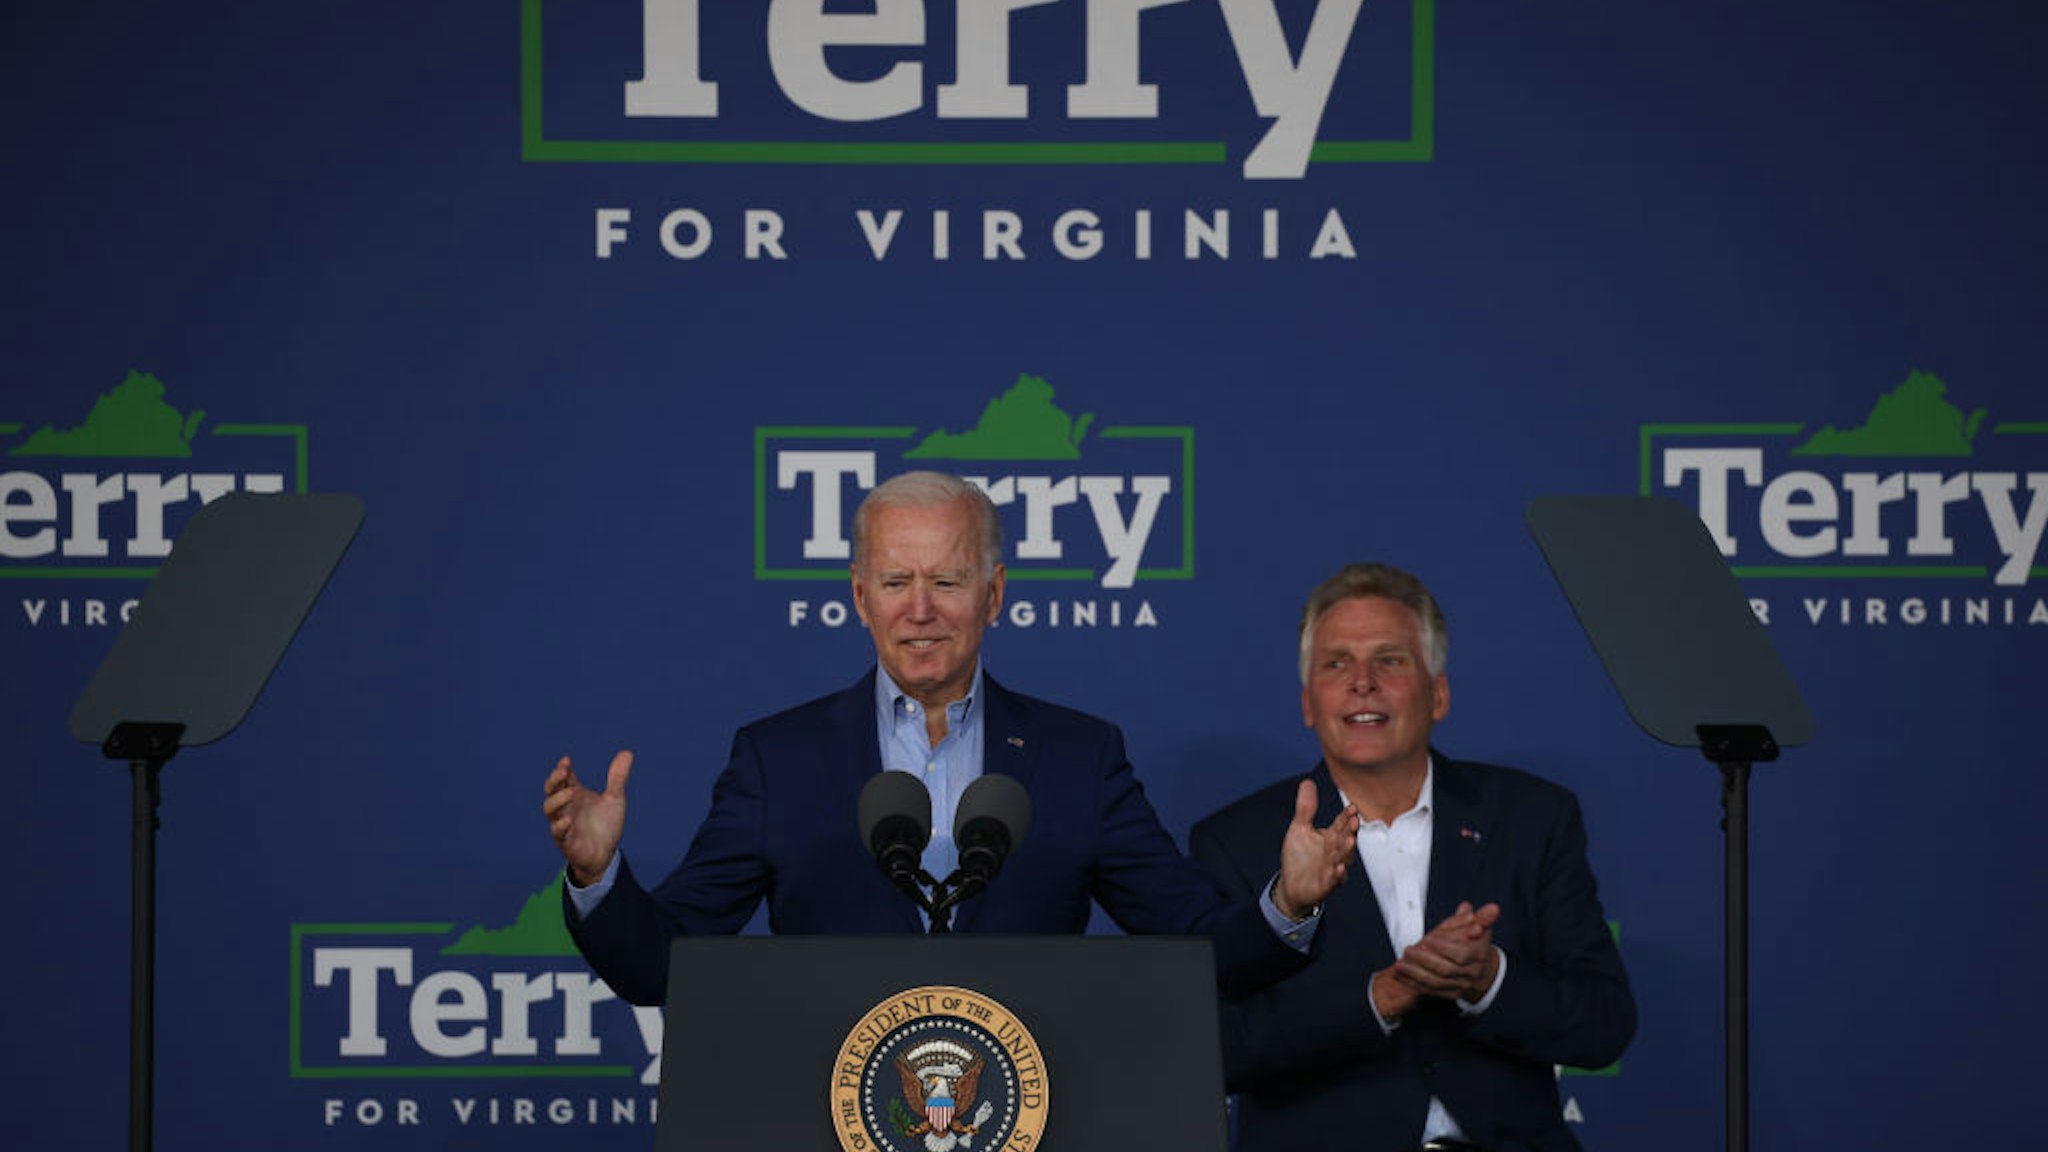 ARLINGTON, VIRGINIA - JULY 23: U.S. President Joe Biden speaks at a campaign event for Virginia gubernatorial candidate Terry McAuliffe (D-VA) at the Lubber Run Community Center on July 22, 2021 in Arlington, Virginia. President Biden joined McCauliffe to help campaign, marking the President’s return to the campaign trail since he entered the White House. (Photo by